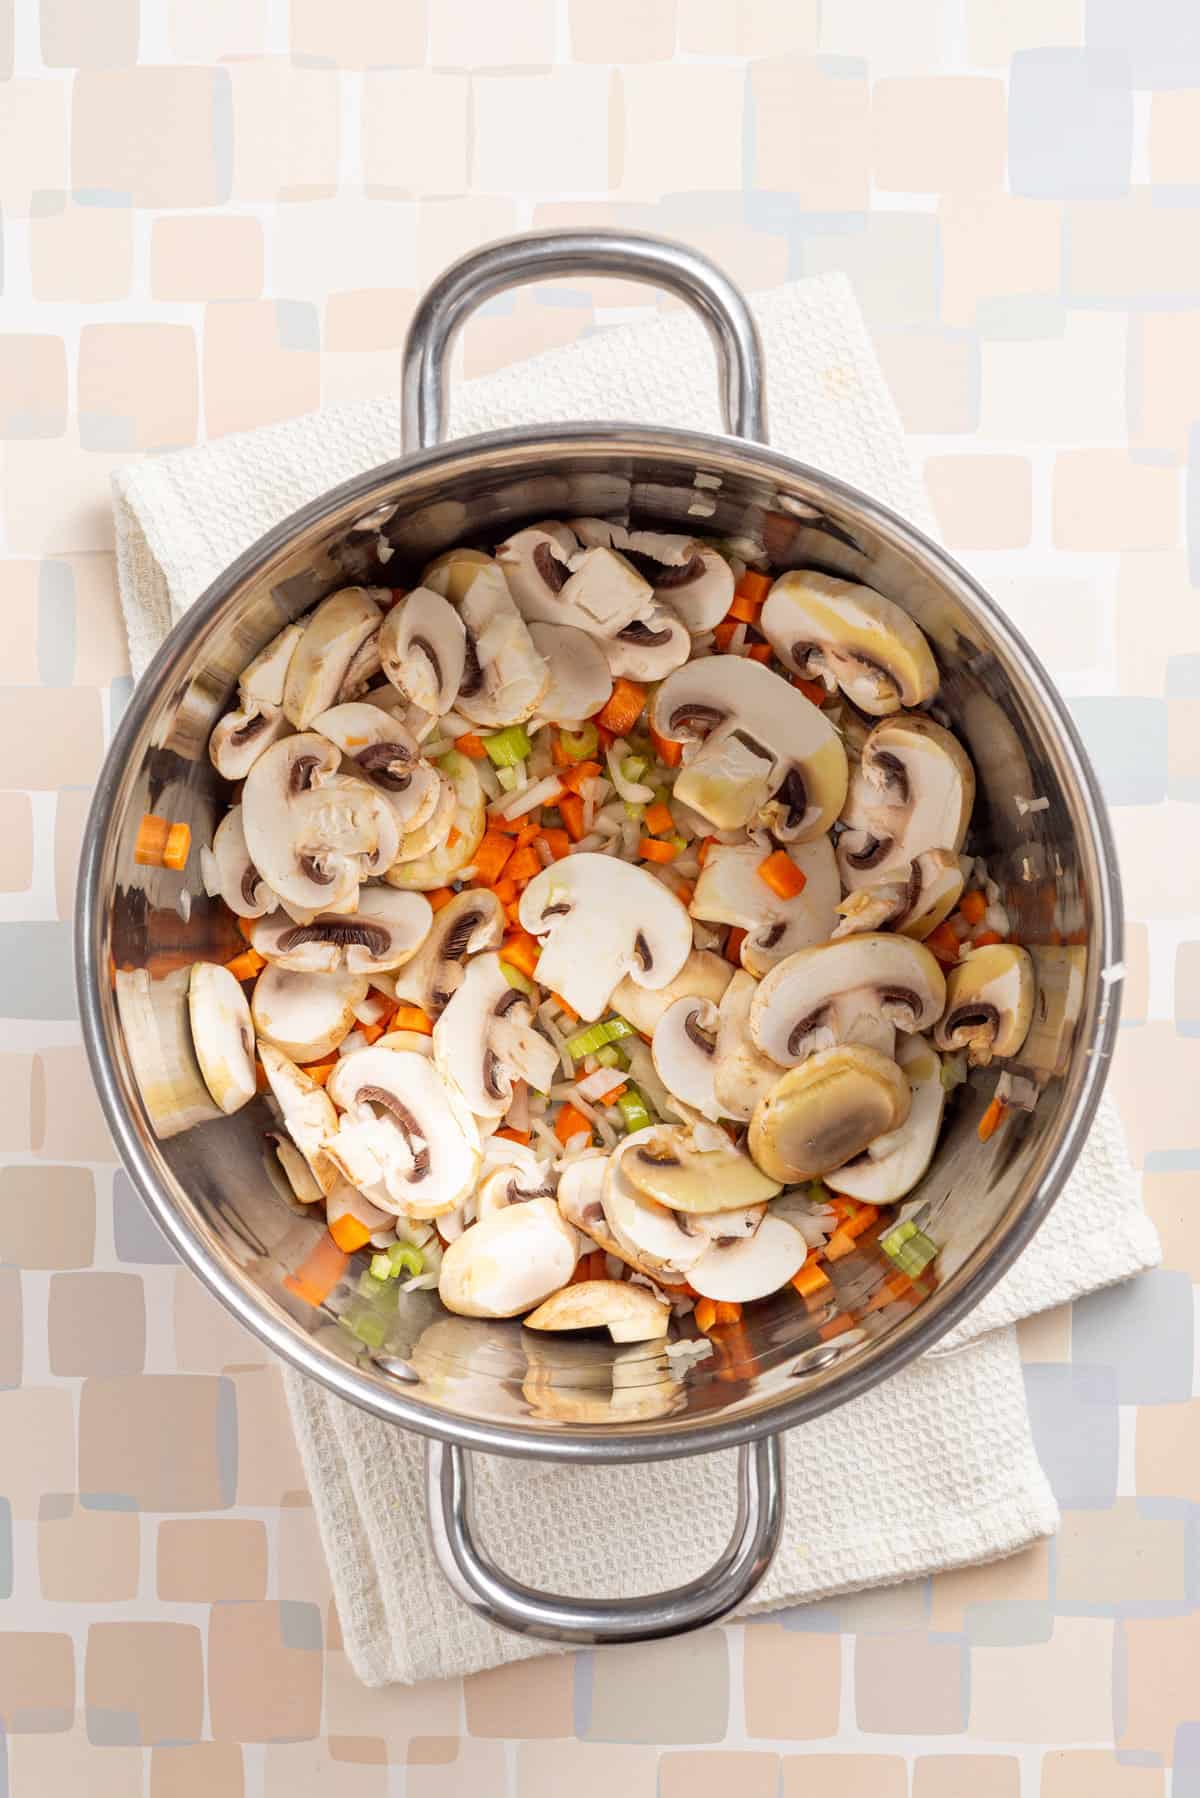 An overhead image of chopped onions, celery, mushrooms and carrots in a saucepan.